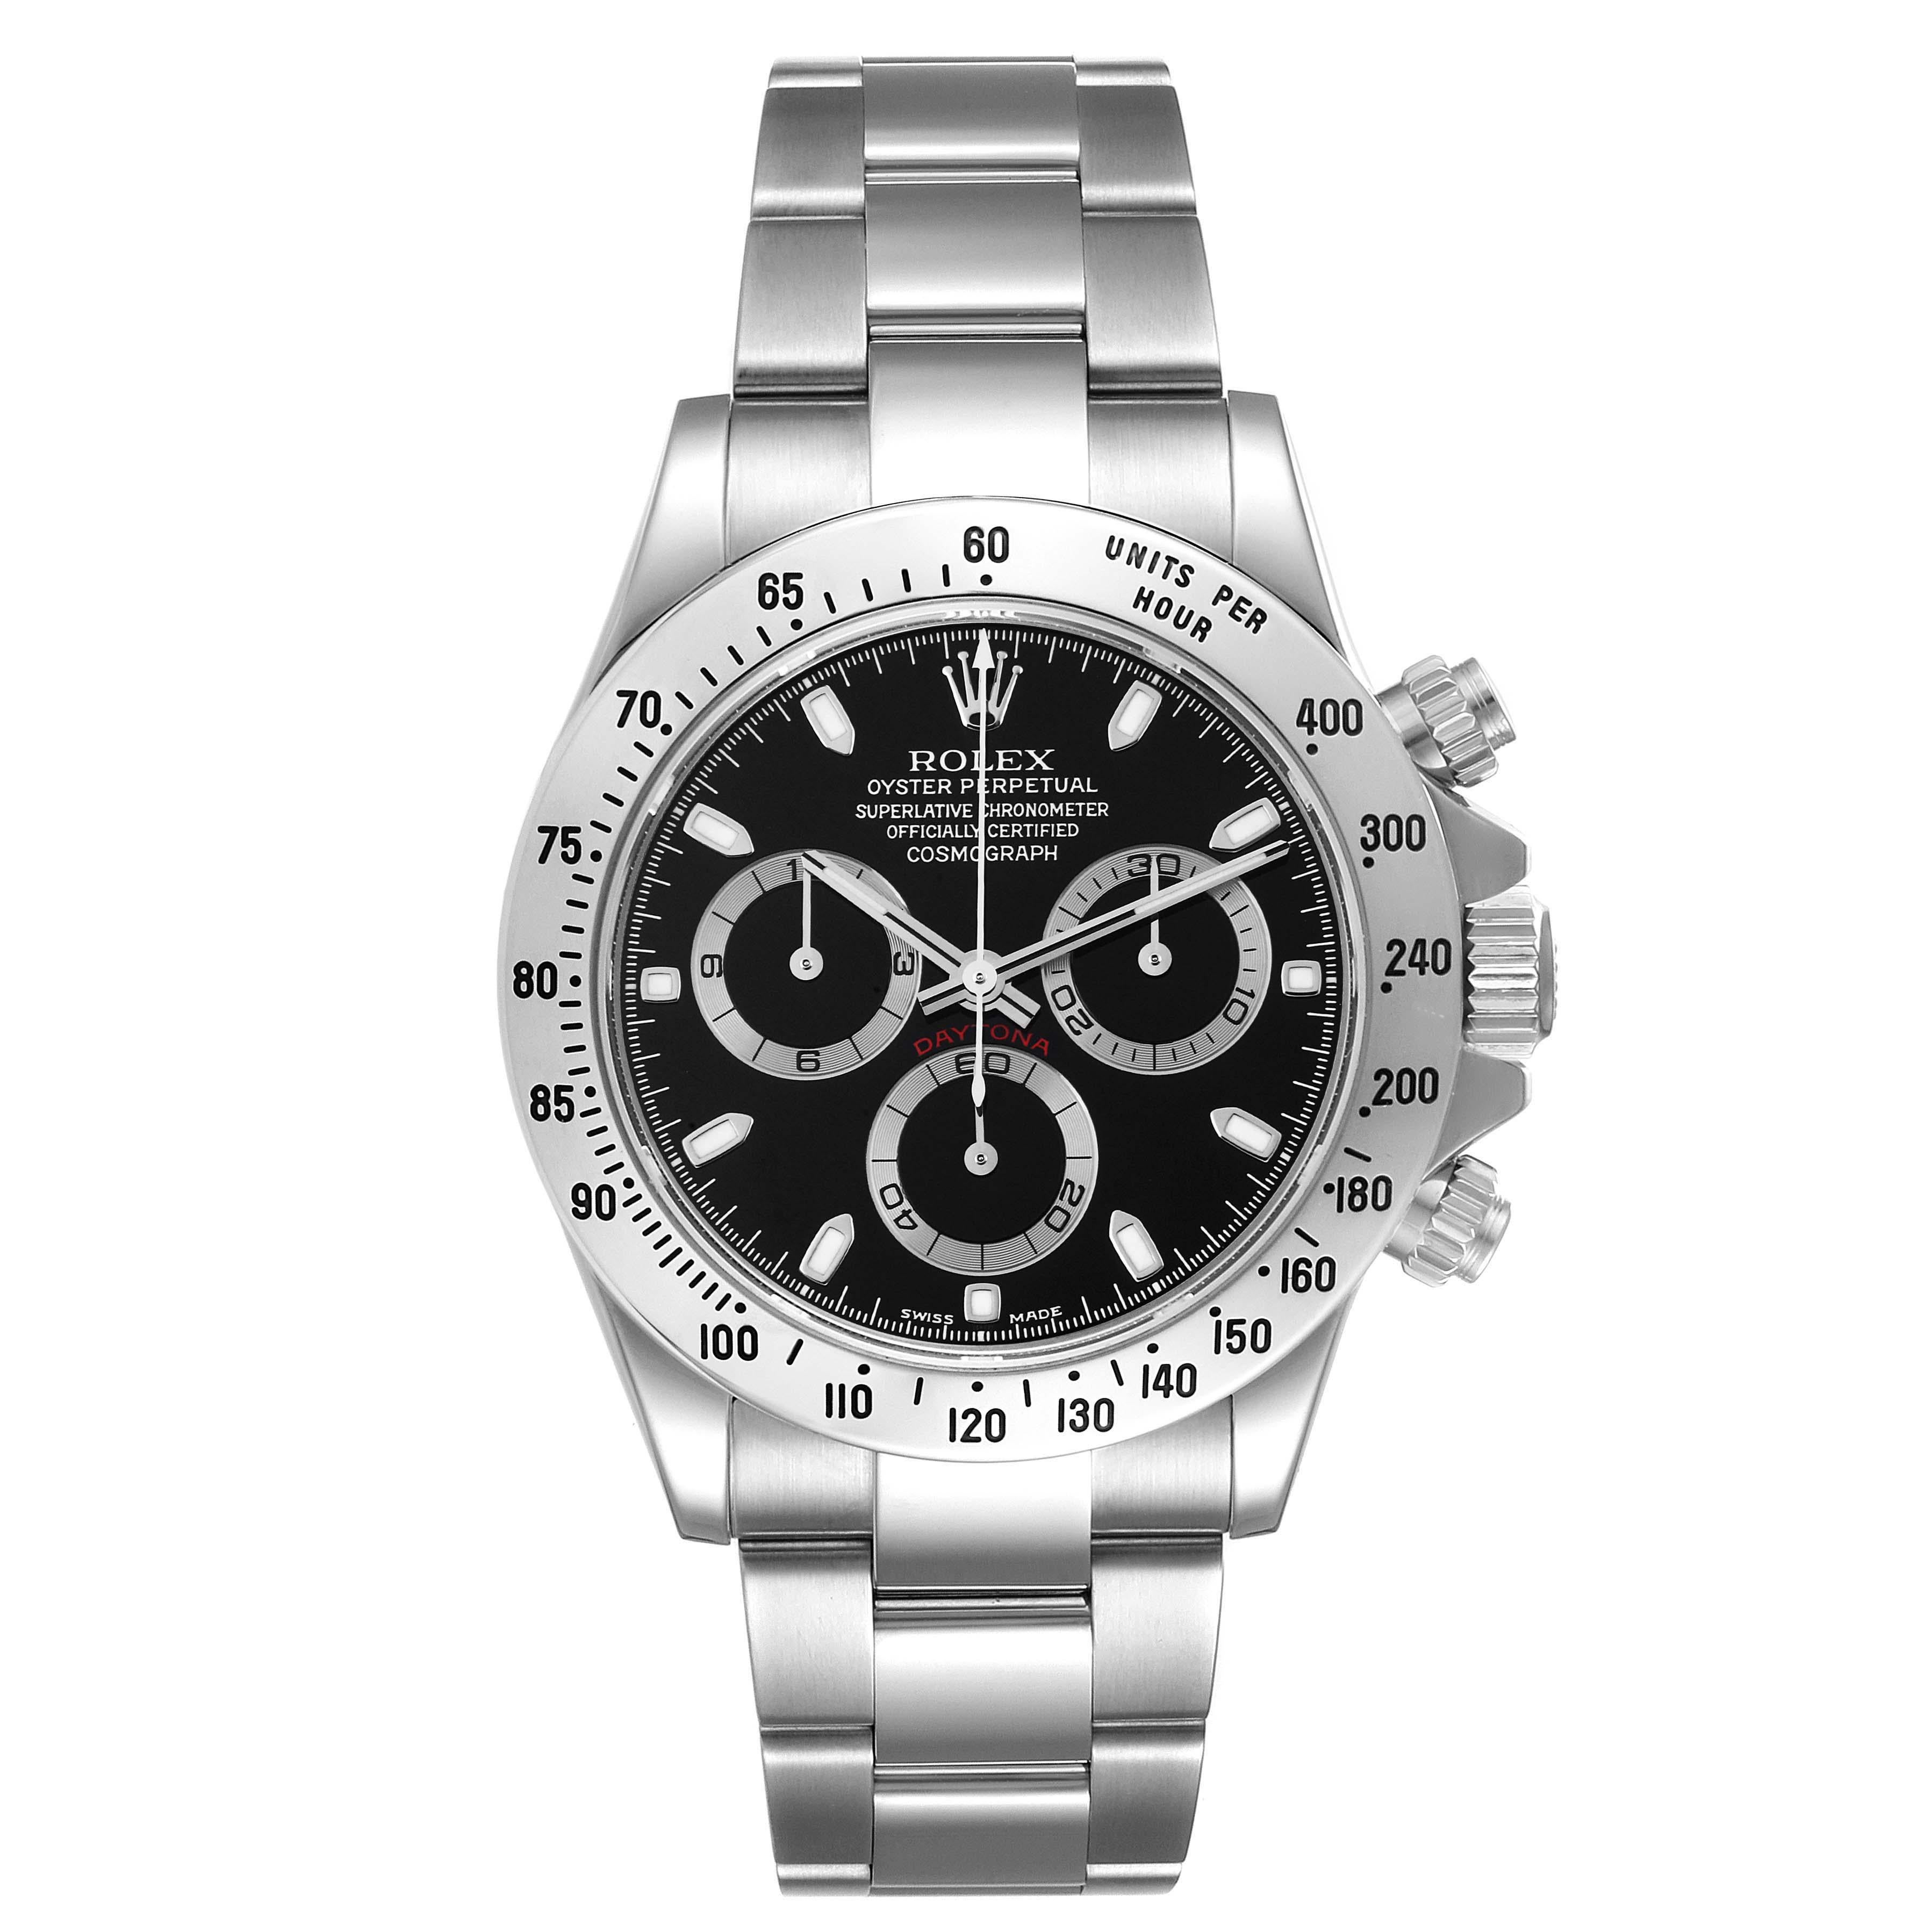 Rolex Daytona Chronograph Black Dial Steel Mens Watch 116520 Box Papers. Officially certified chronometer automatic self-winding movement. Stainless steel case 40 mm in diameter. Special screw-down push buttons. Polished stainless steel bezel with